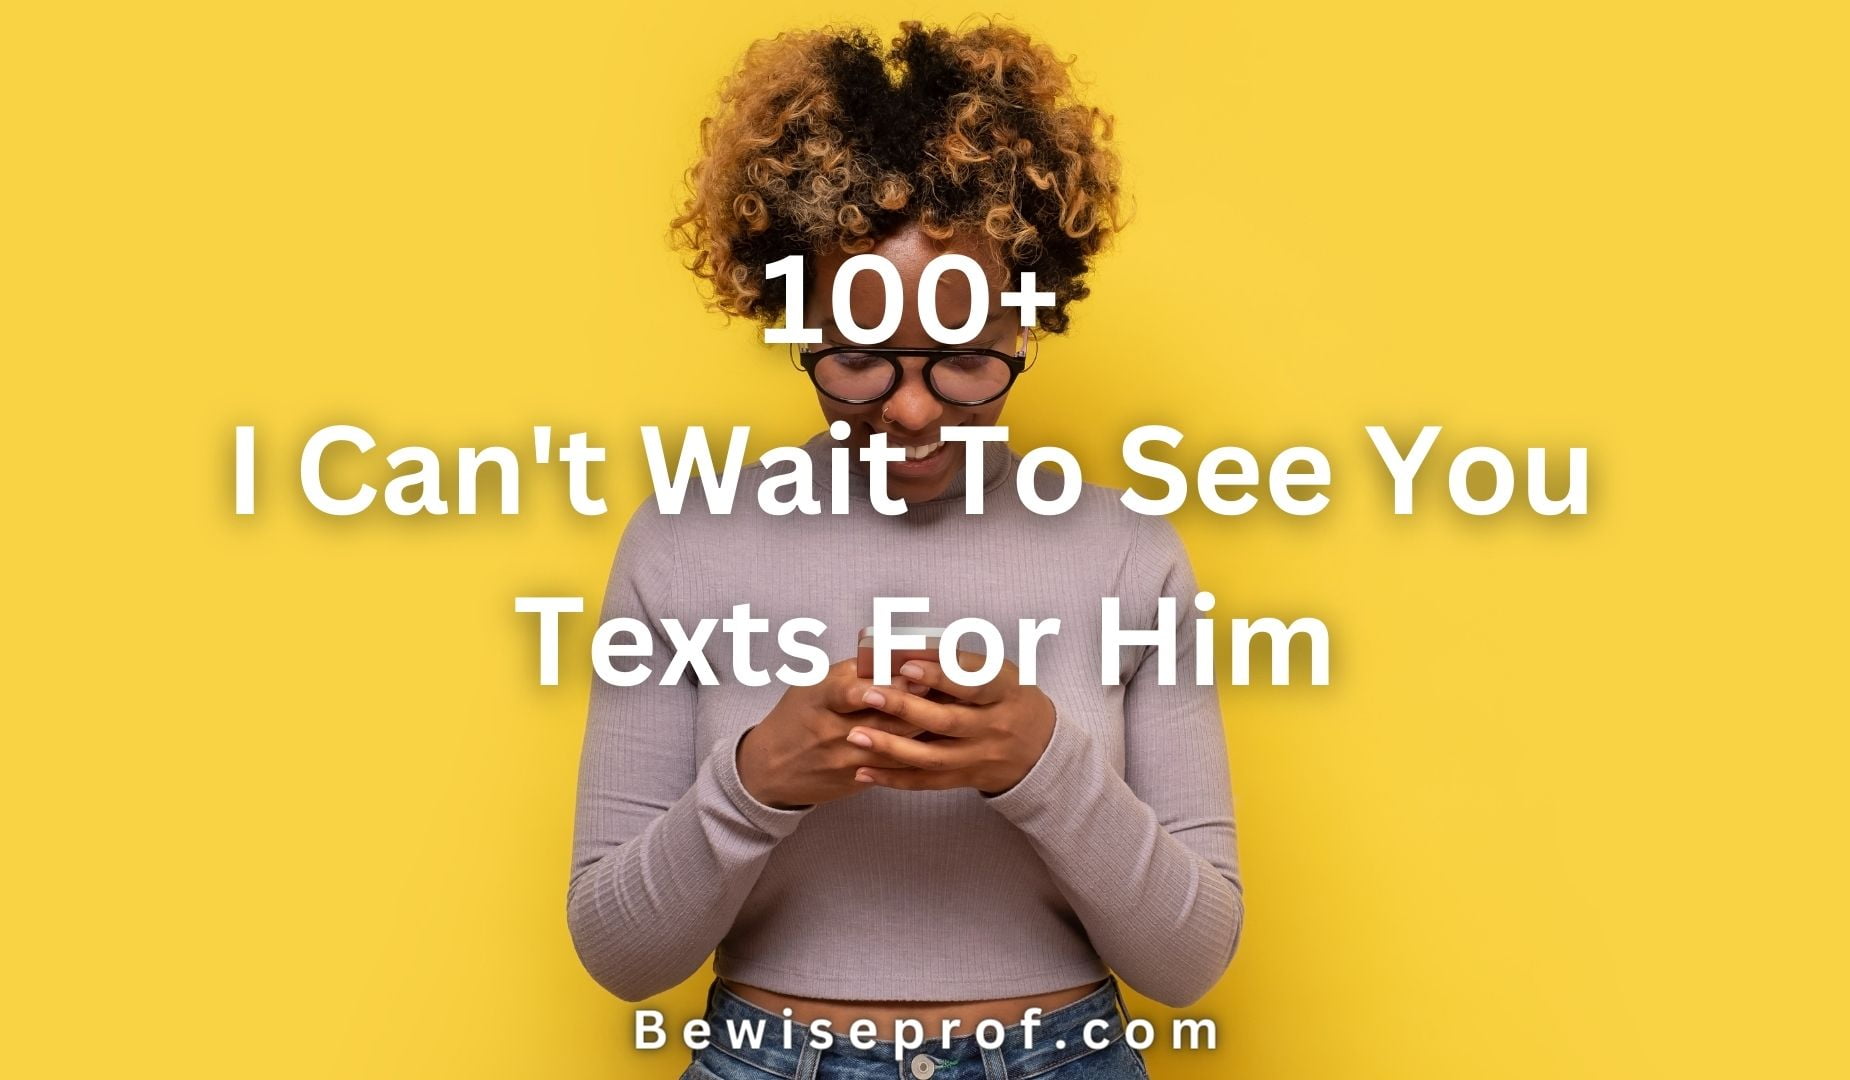 100+ I Can't Wait To See You Texts For Him